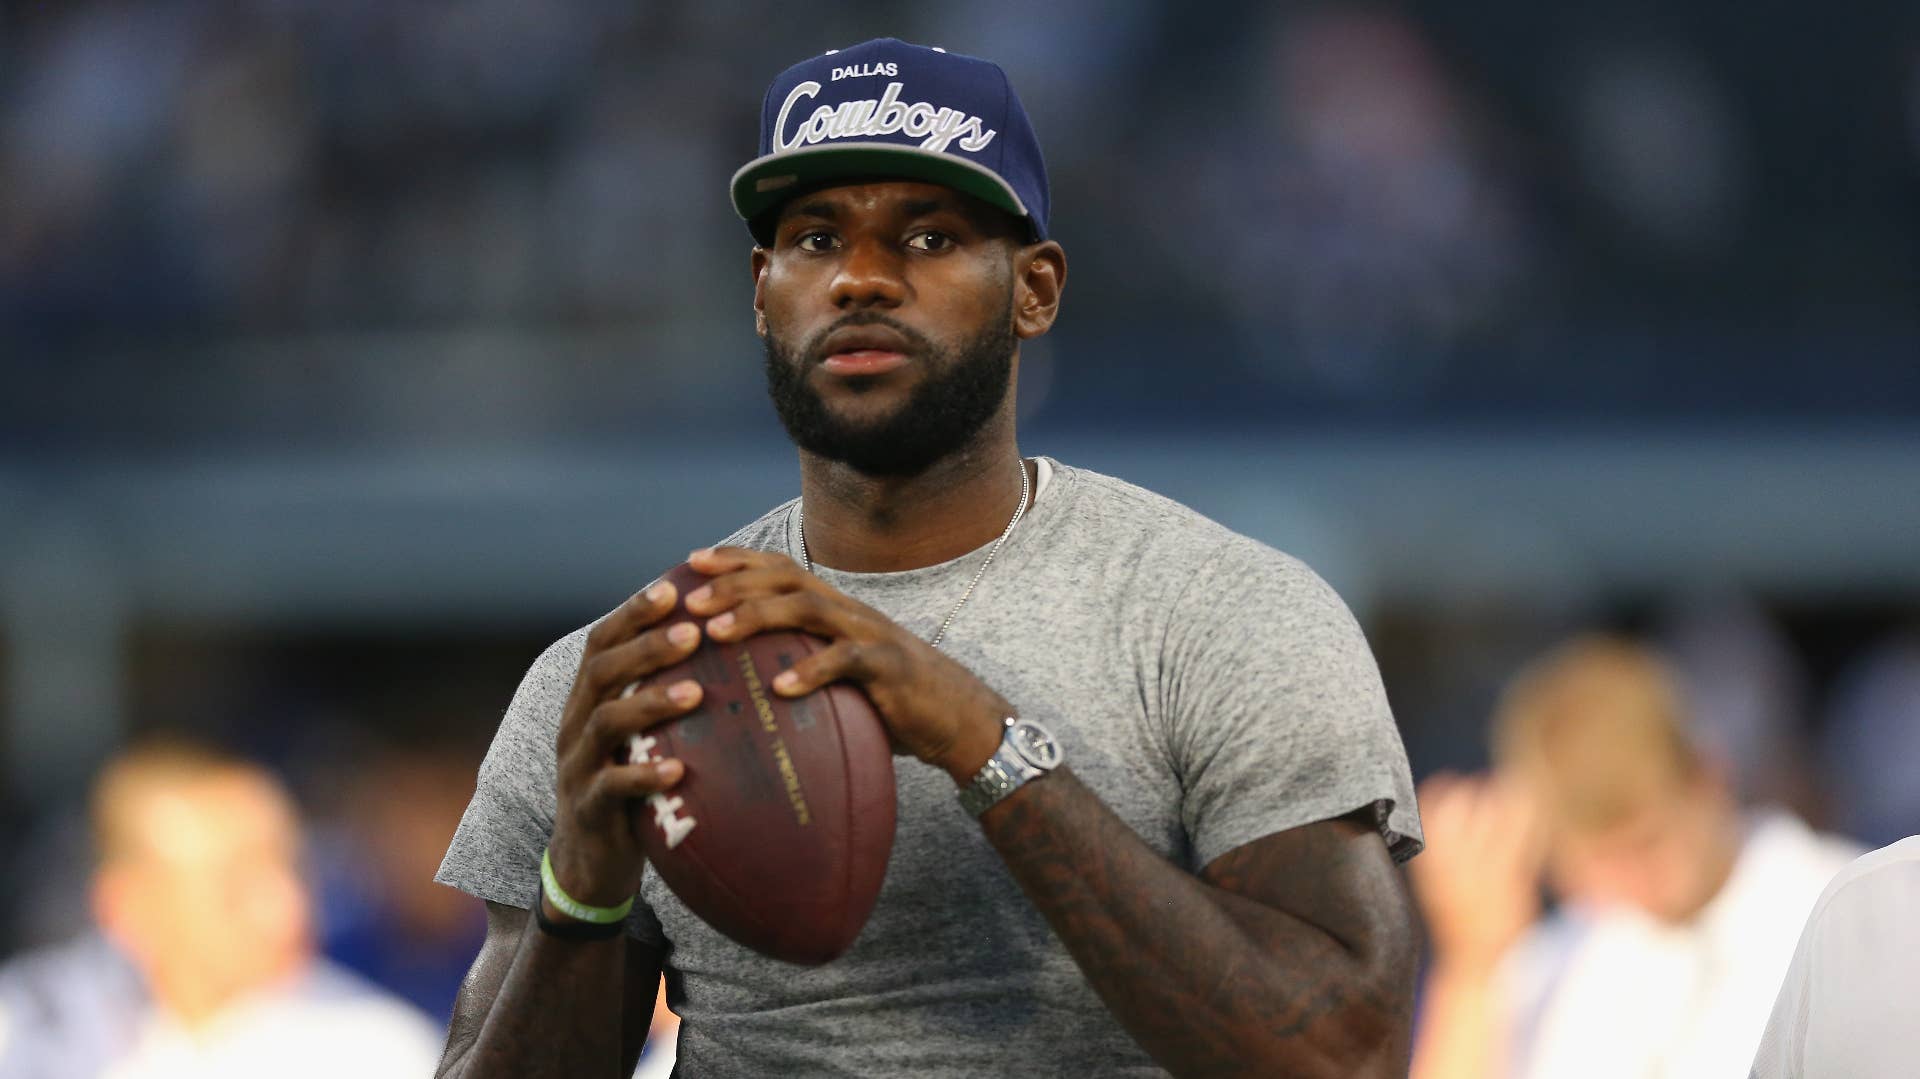 Lebron James throws a football at AT&T Stadium before Giants and Cowboys game.